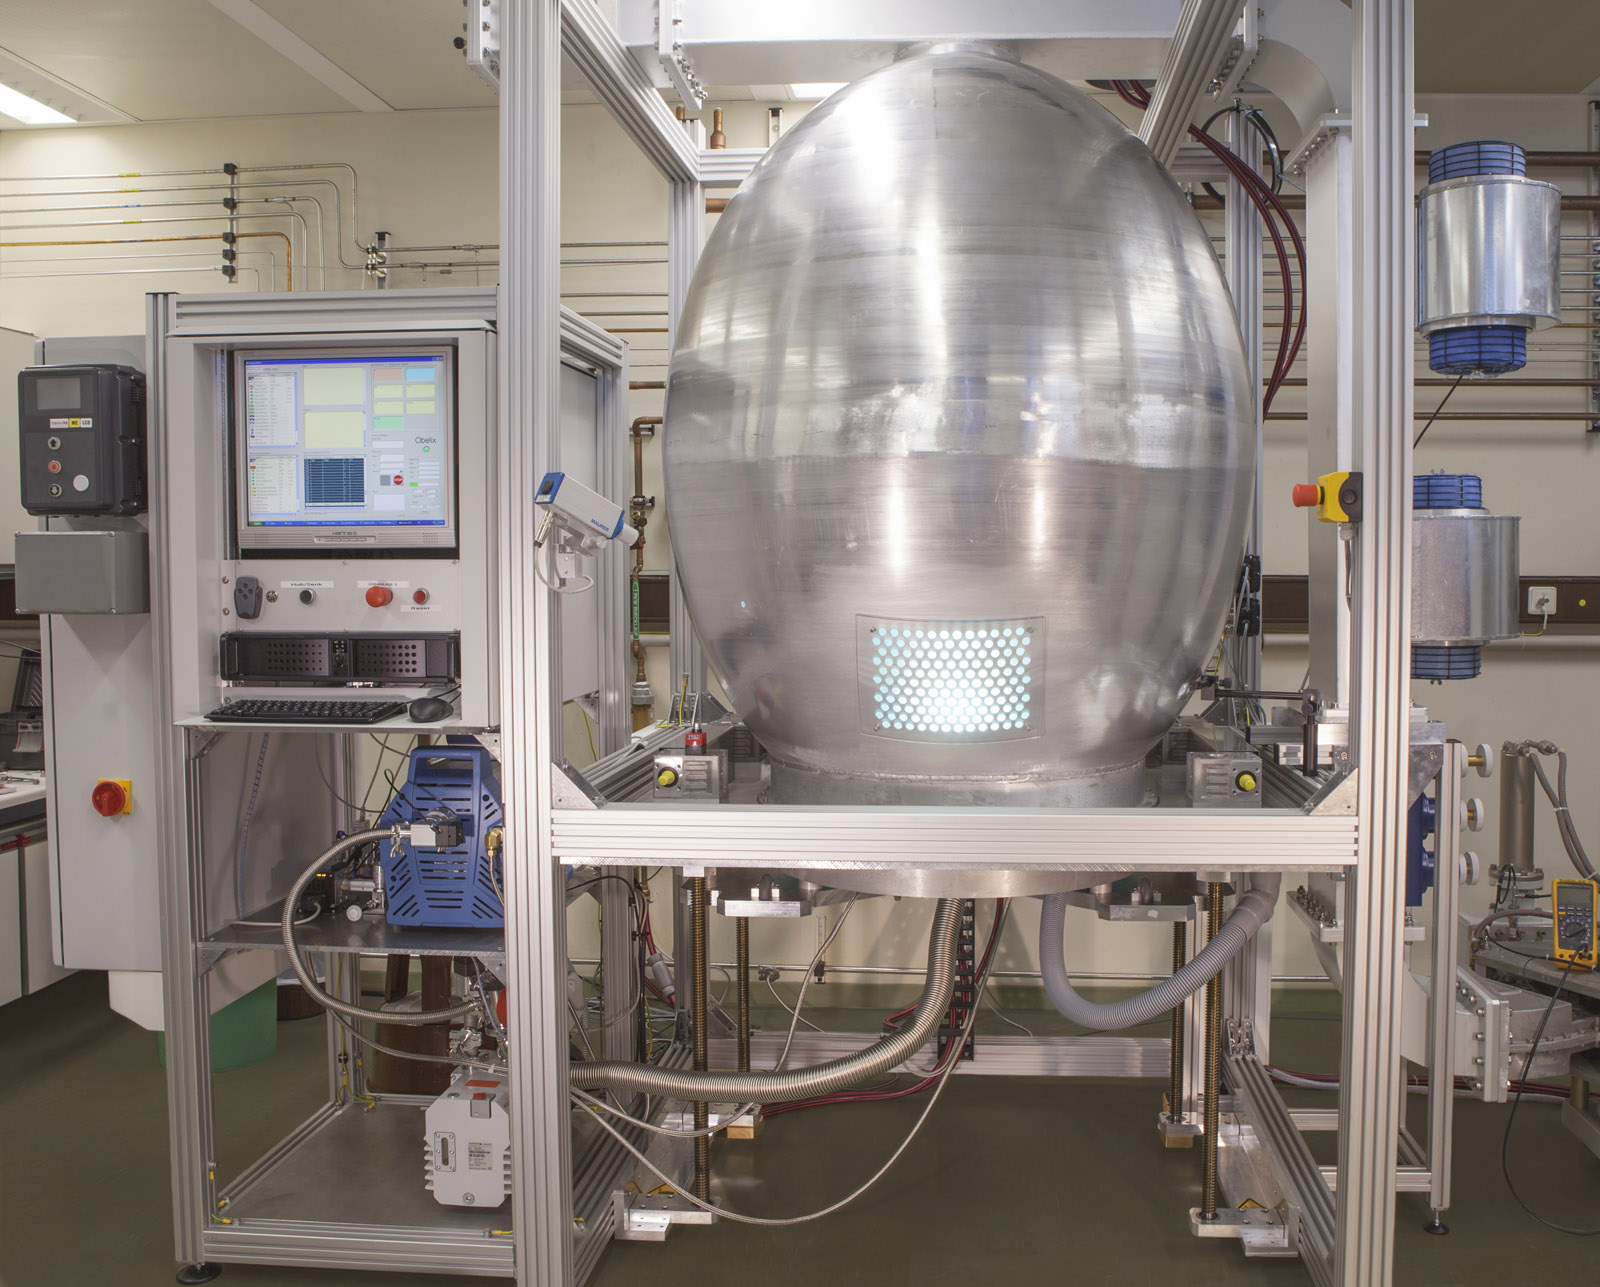 The special ellipsoid form of the plasma reactor developed at Fraunhofer IAF allows for large-scale diamond separation.